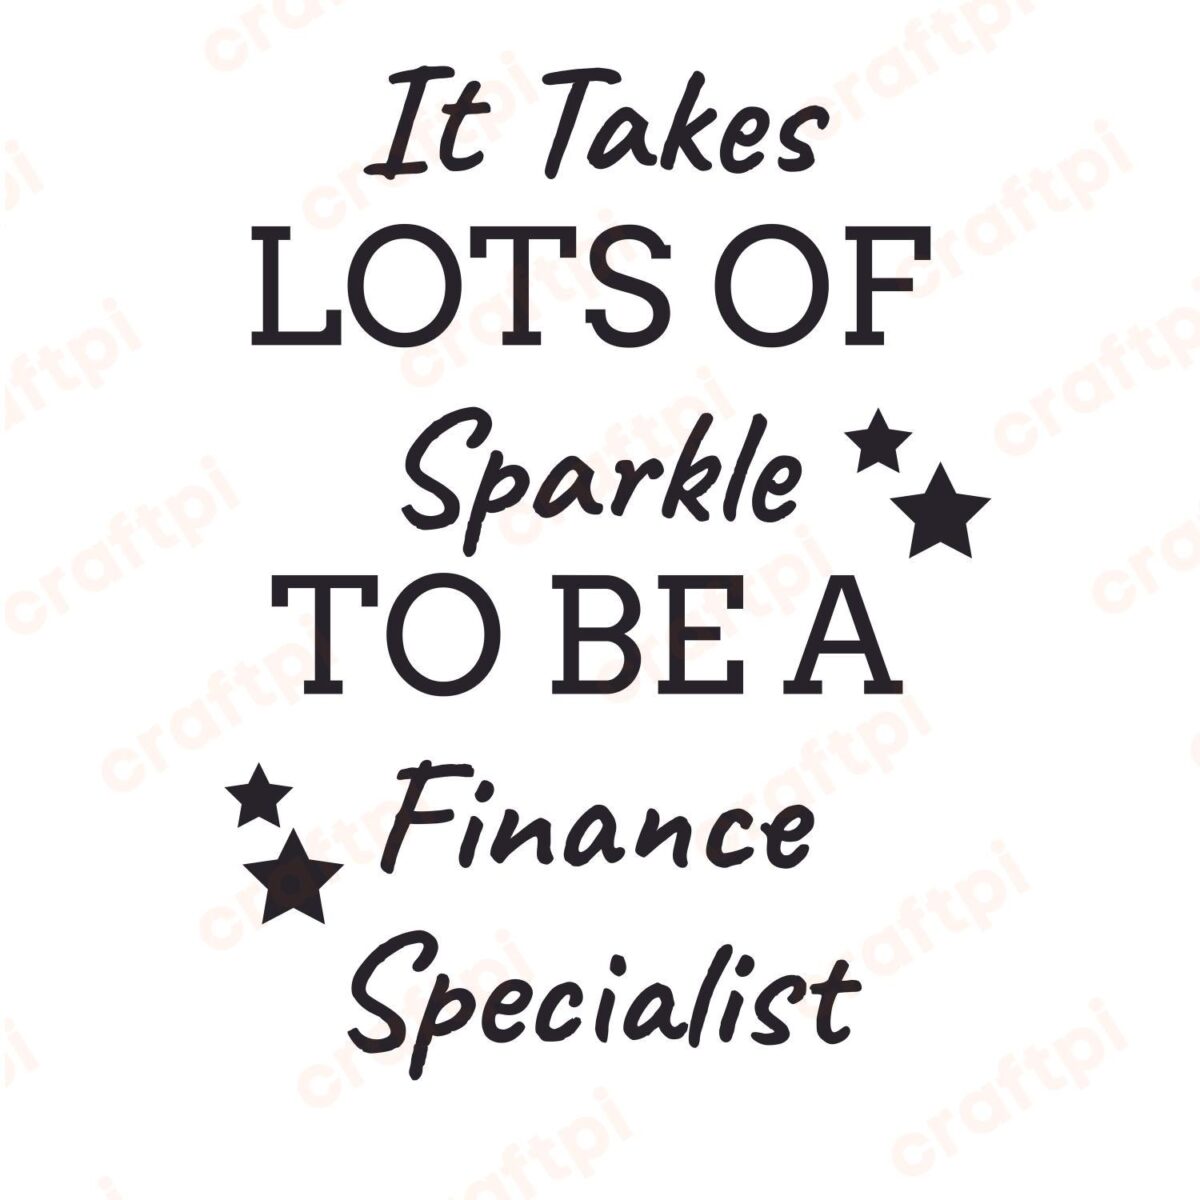 It Takes Lots Of Sparkle To Be An Finance Specialist SVG, PNG, JPG, PSD, PDF Files